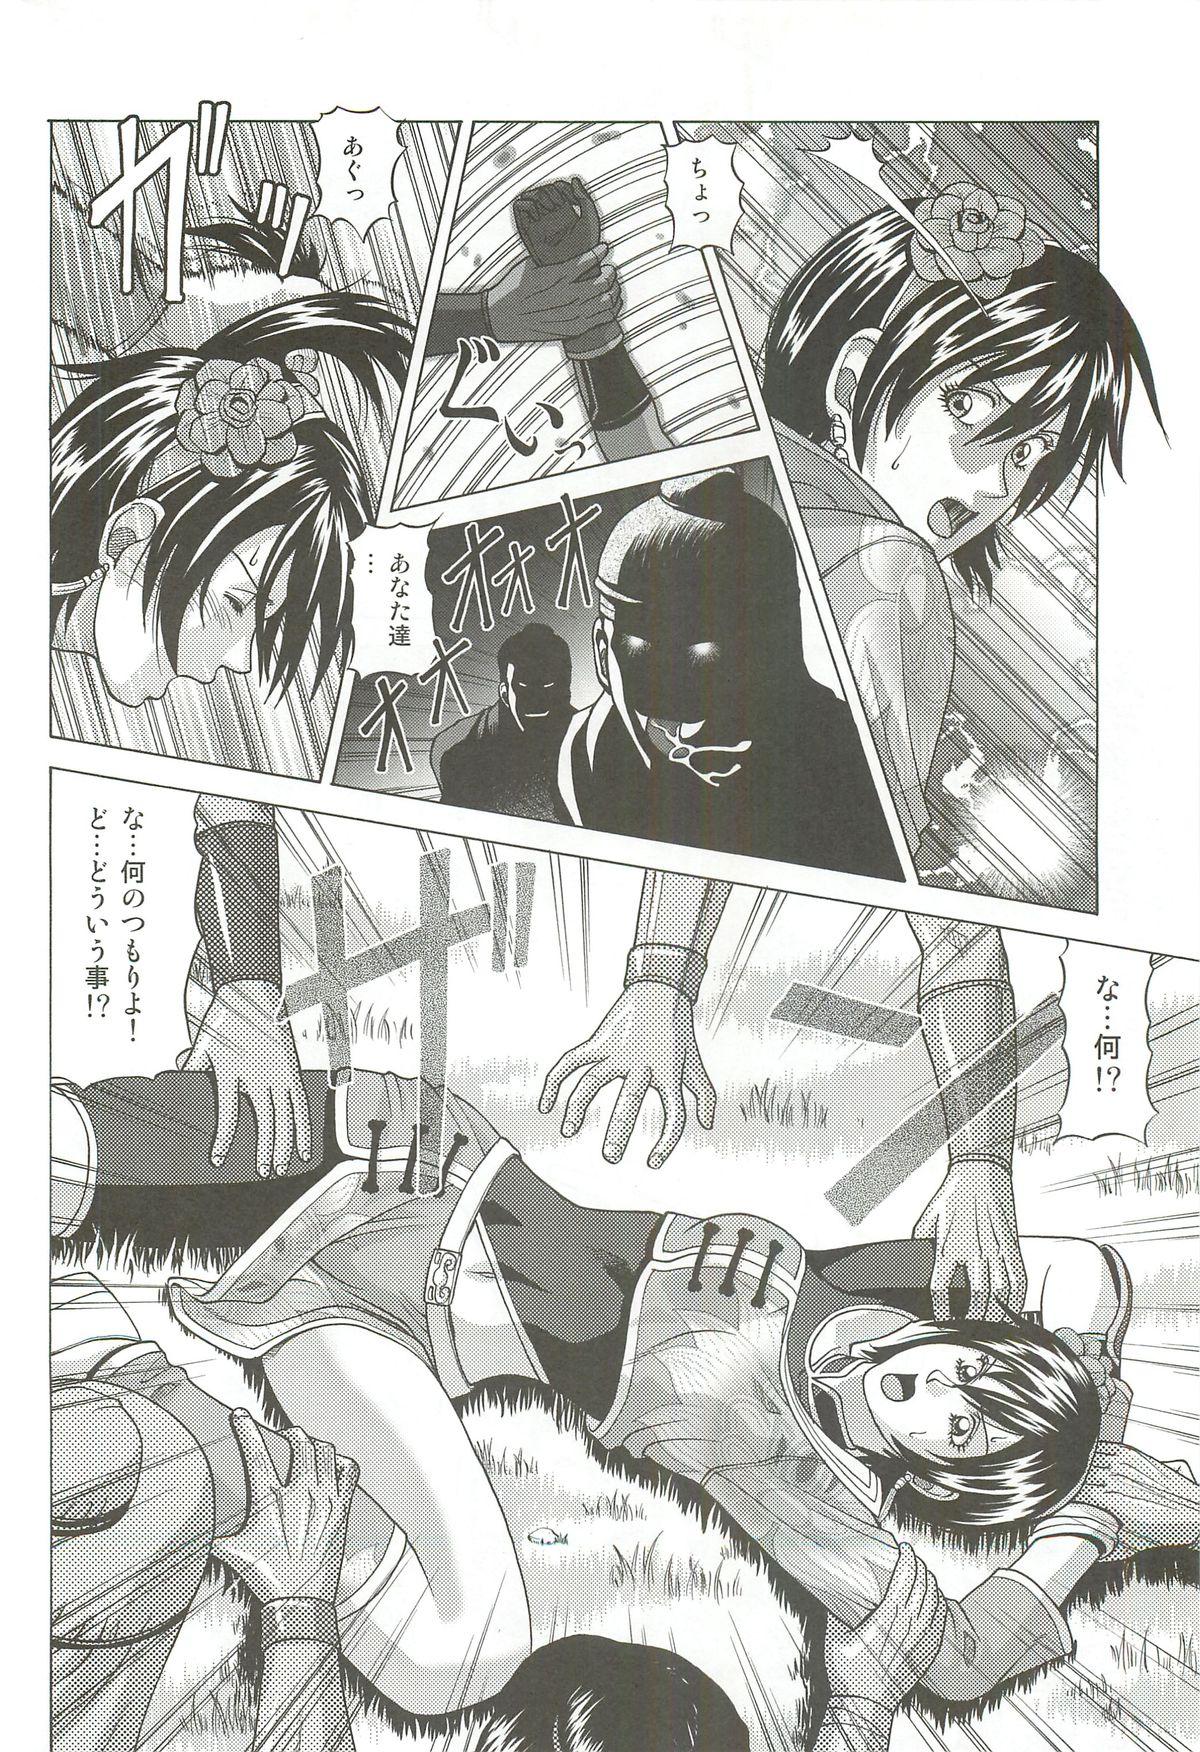 Interview Sonshoukou - Dynasty warriors Massage Creep - Page 5